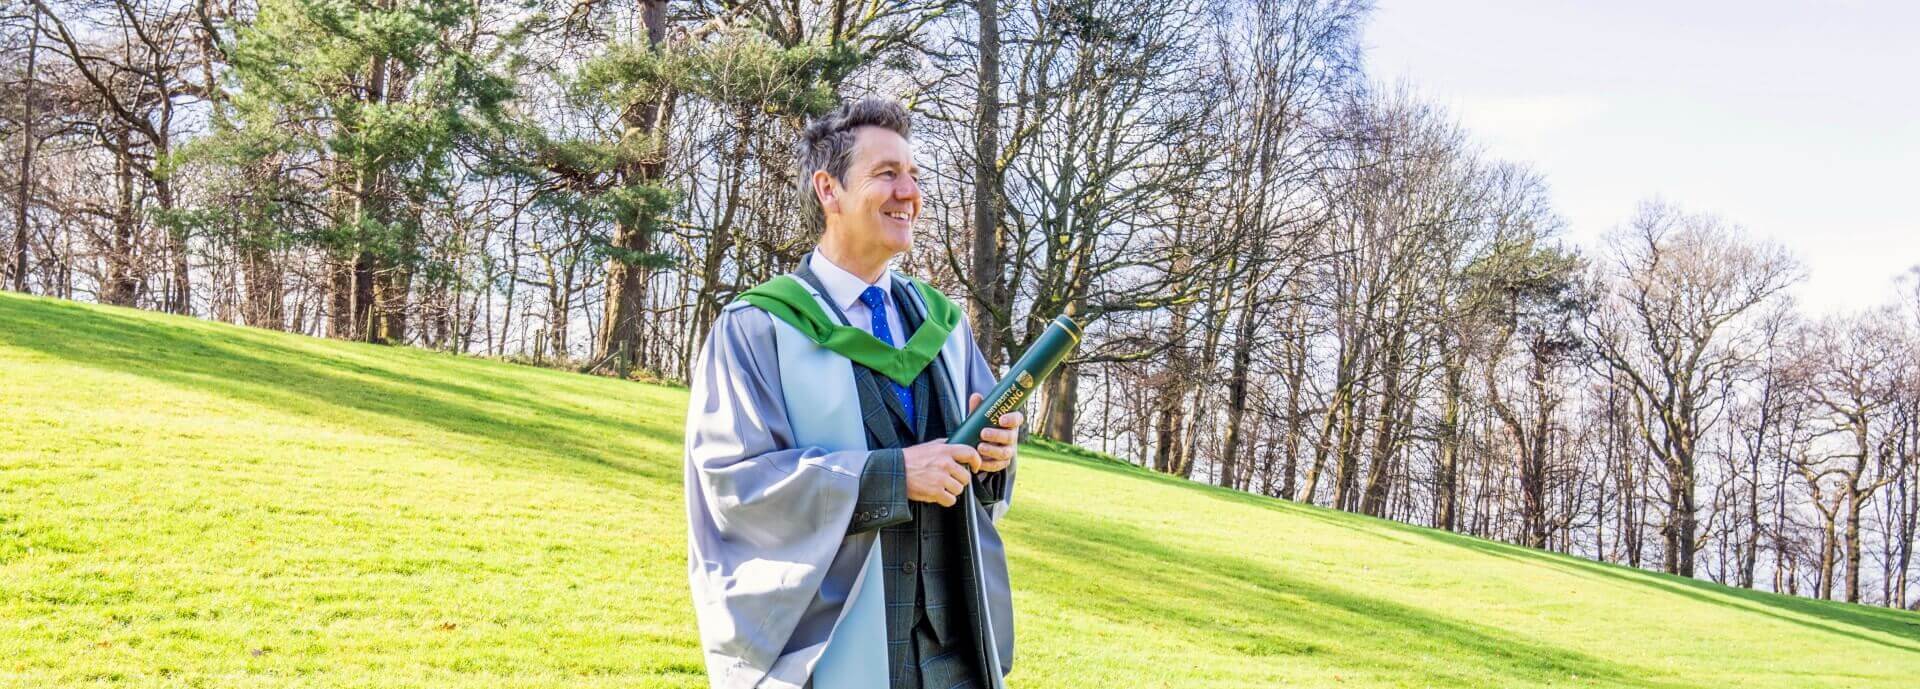 Dougie Vipond poses with his degree on the University of Stirling campus.